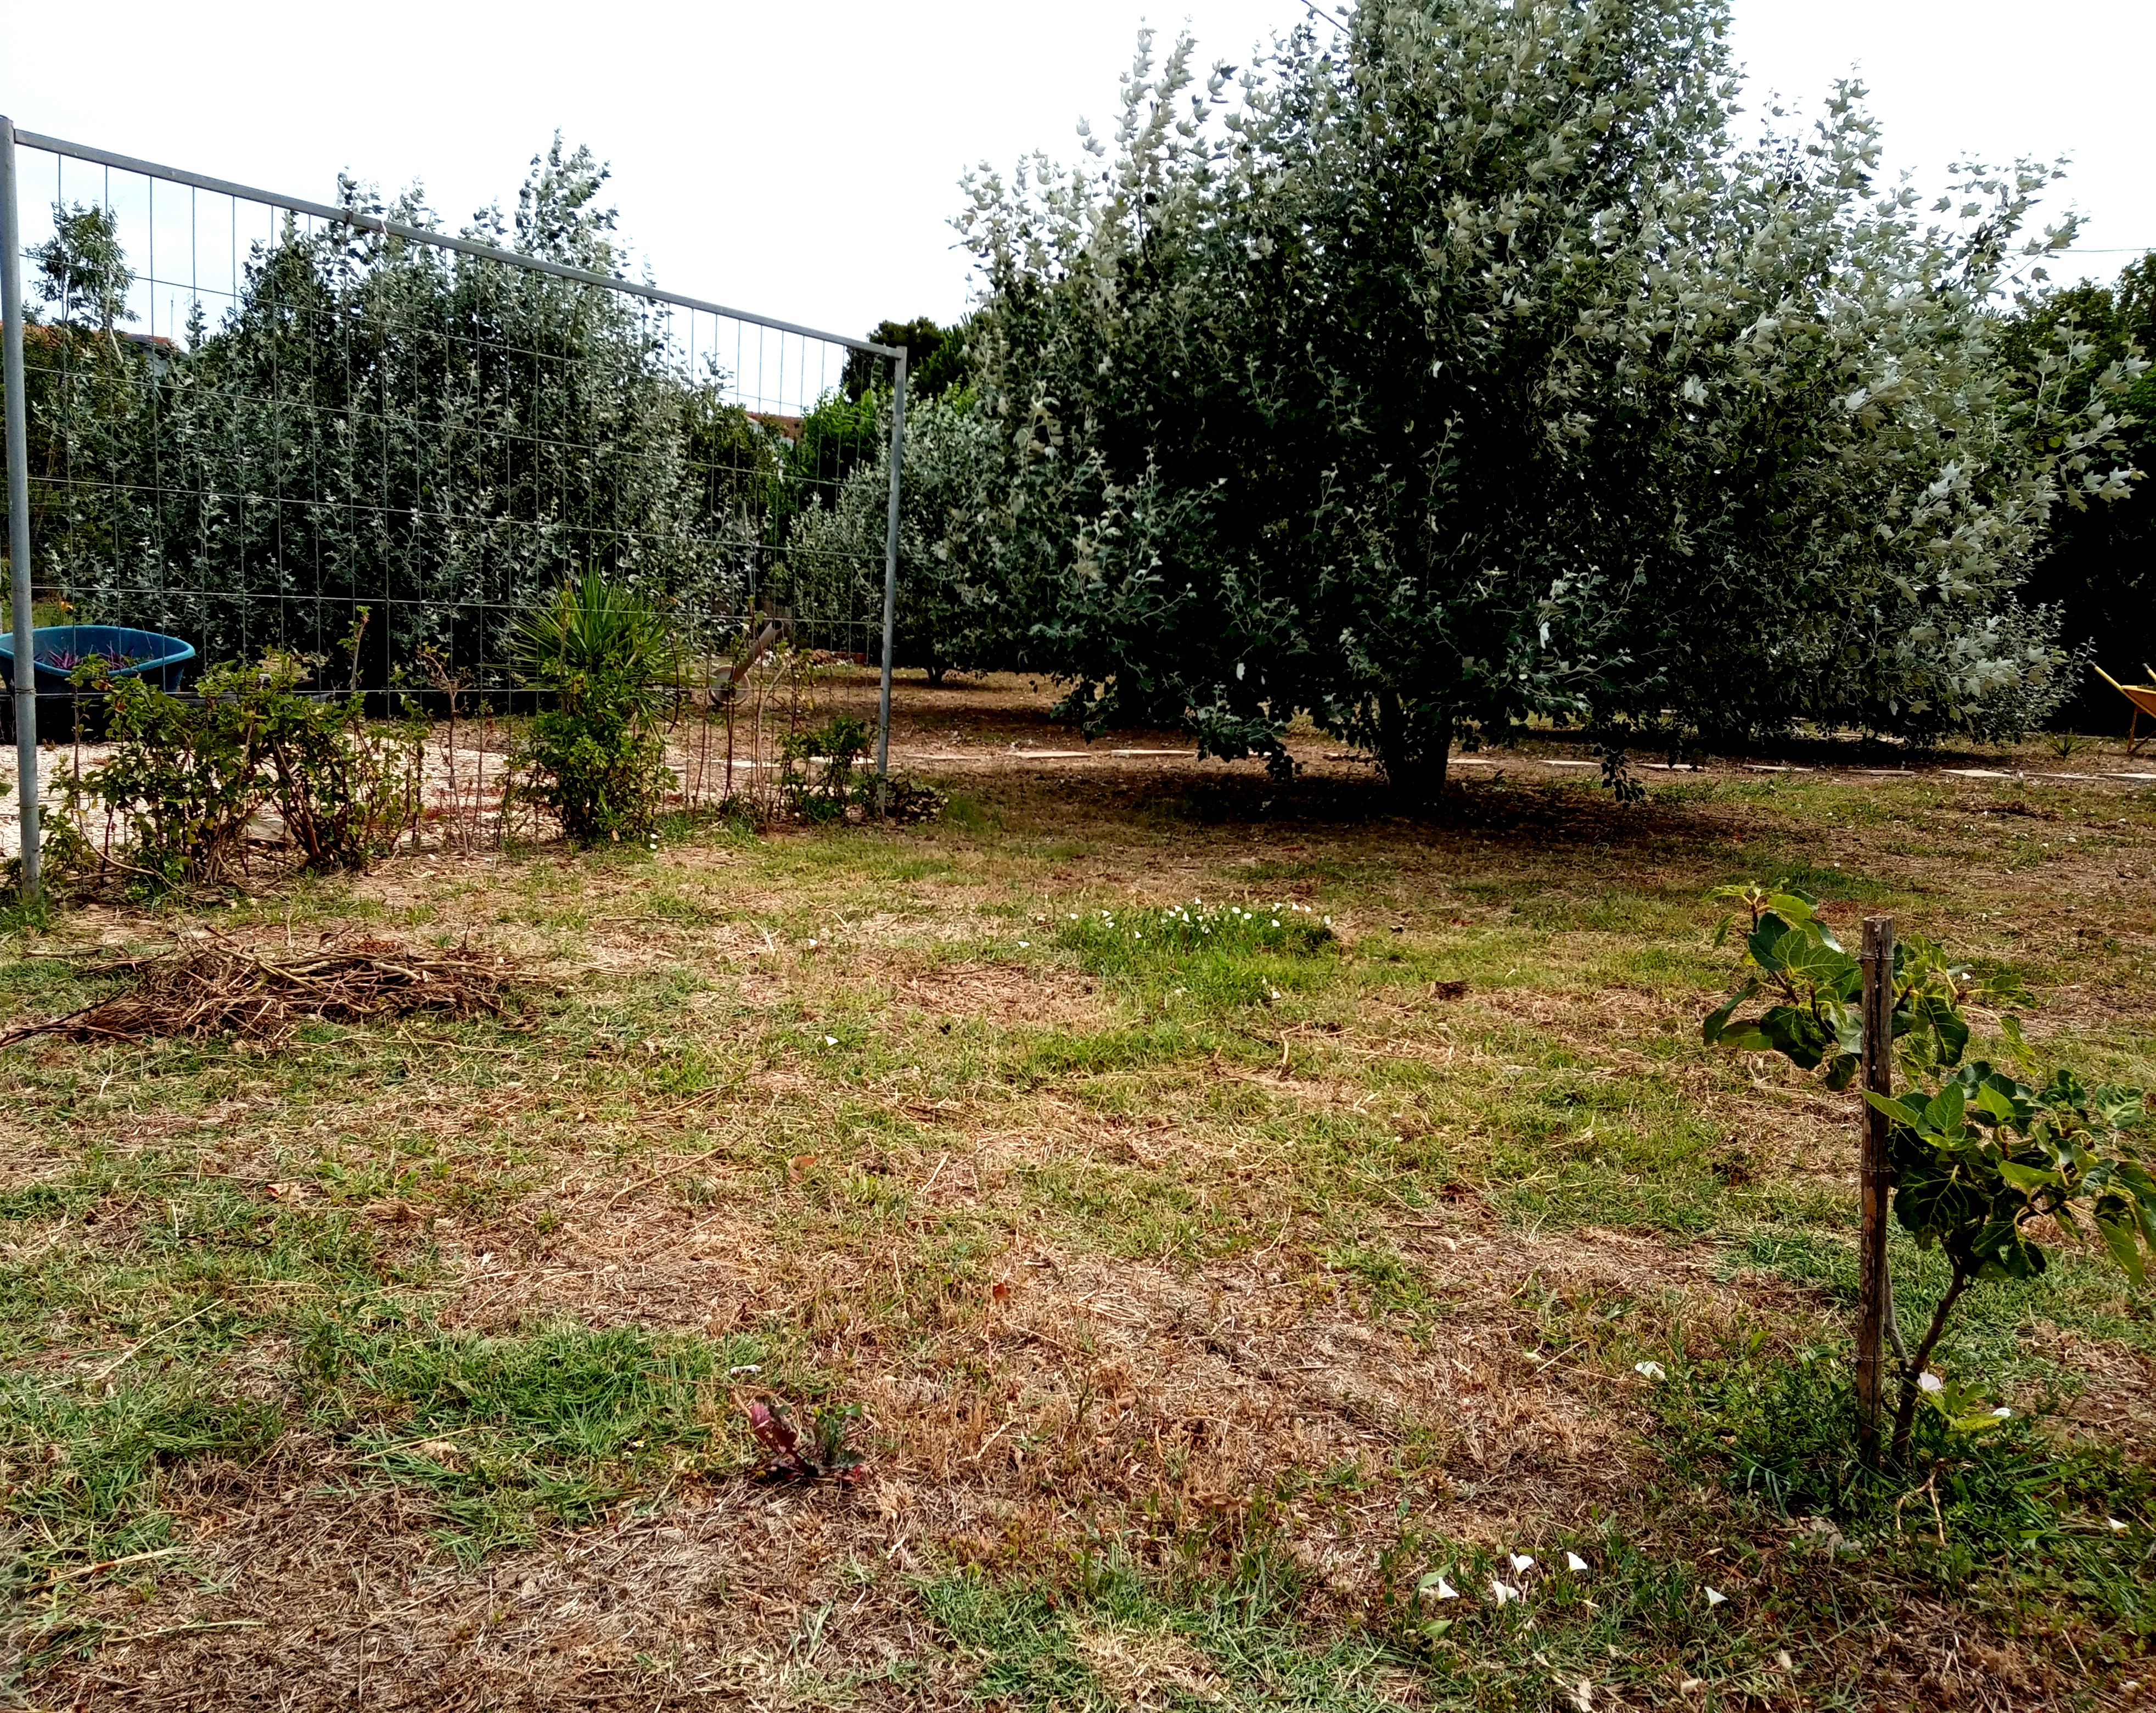 Green area in Brindisi's countryside